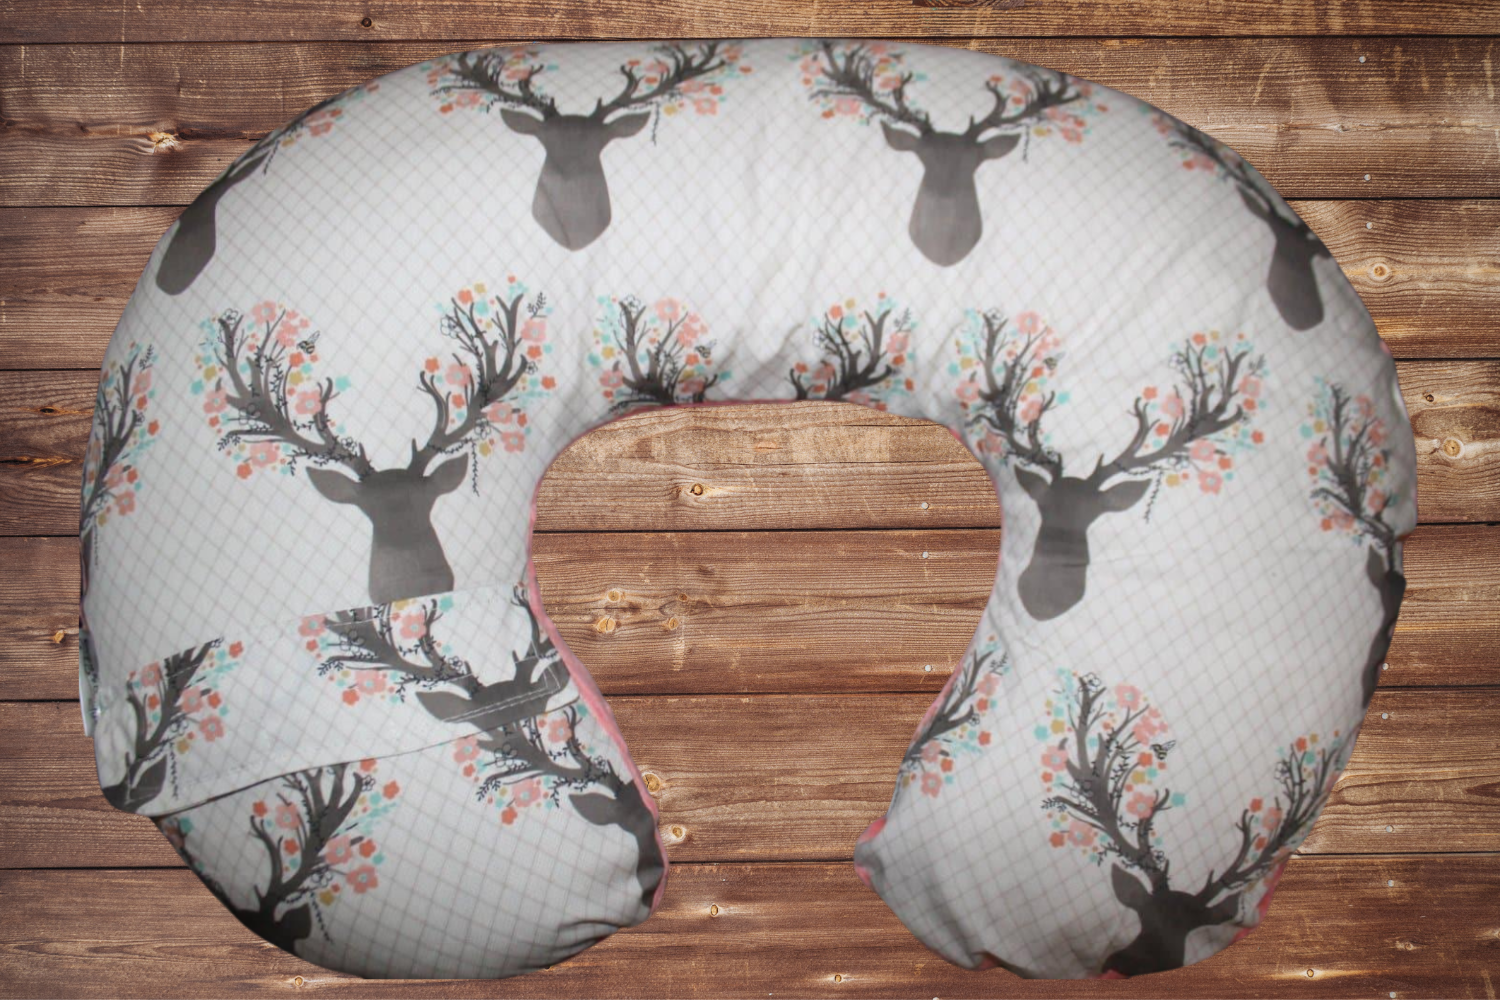 Nursing Pillow Cover - Tulip Fawn and Minky Woodland Cover - DBC Baby Bedding Co 